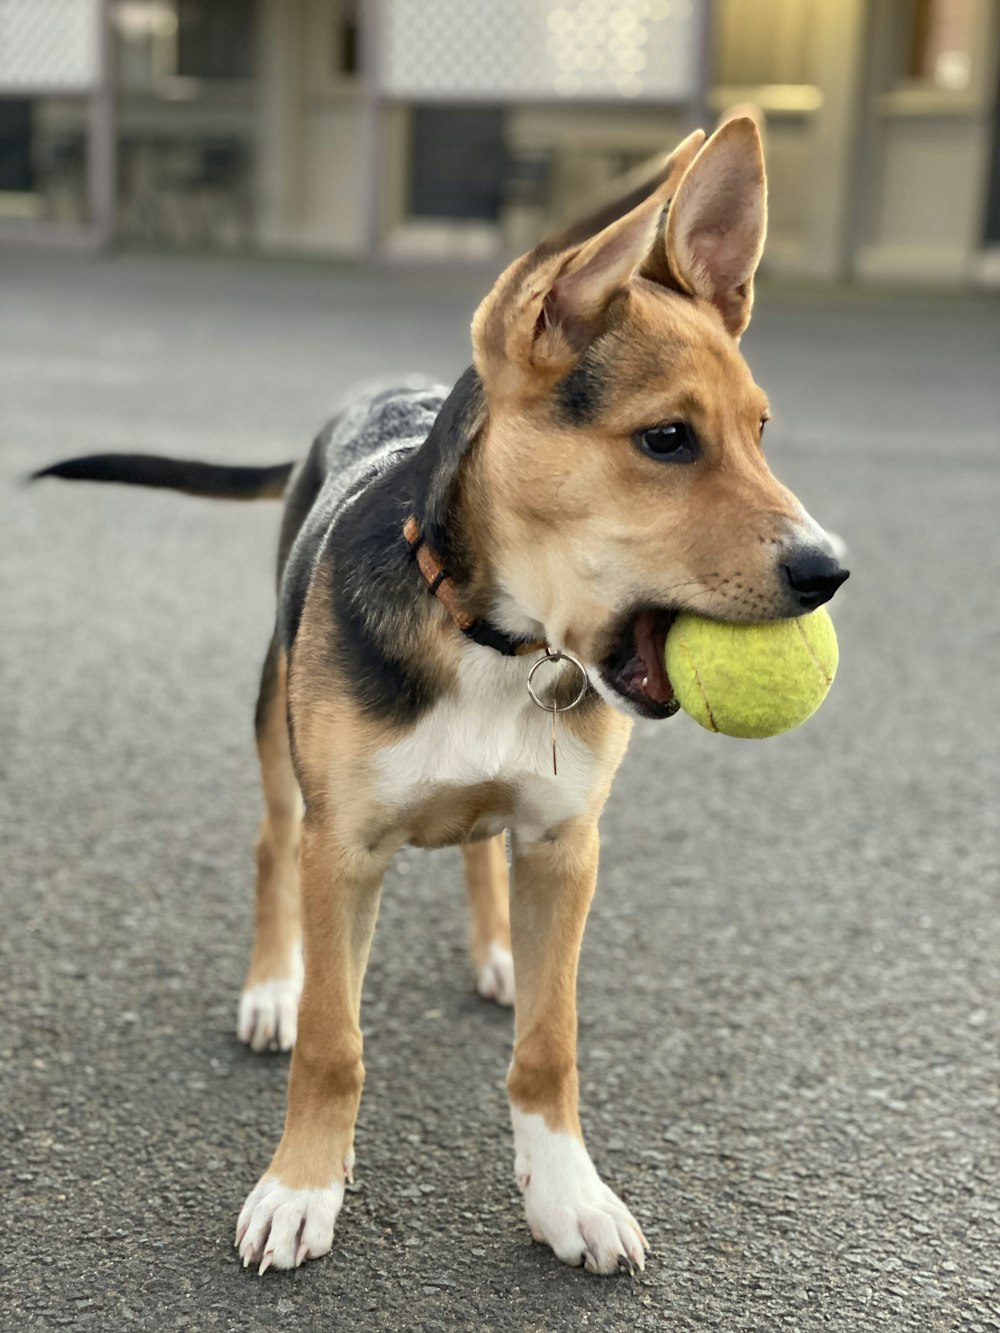 brown and black short coated dog biting tennis ball